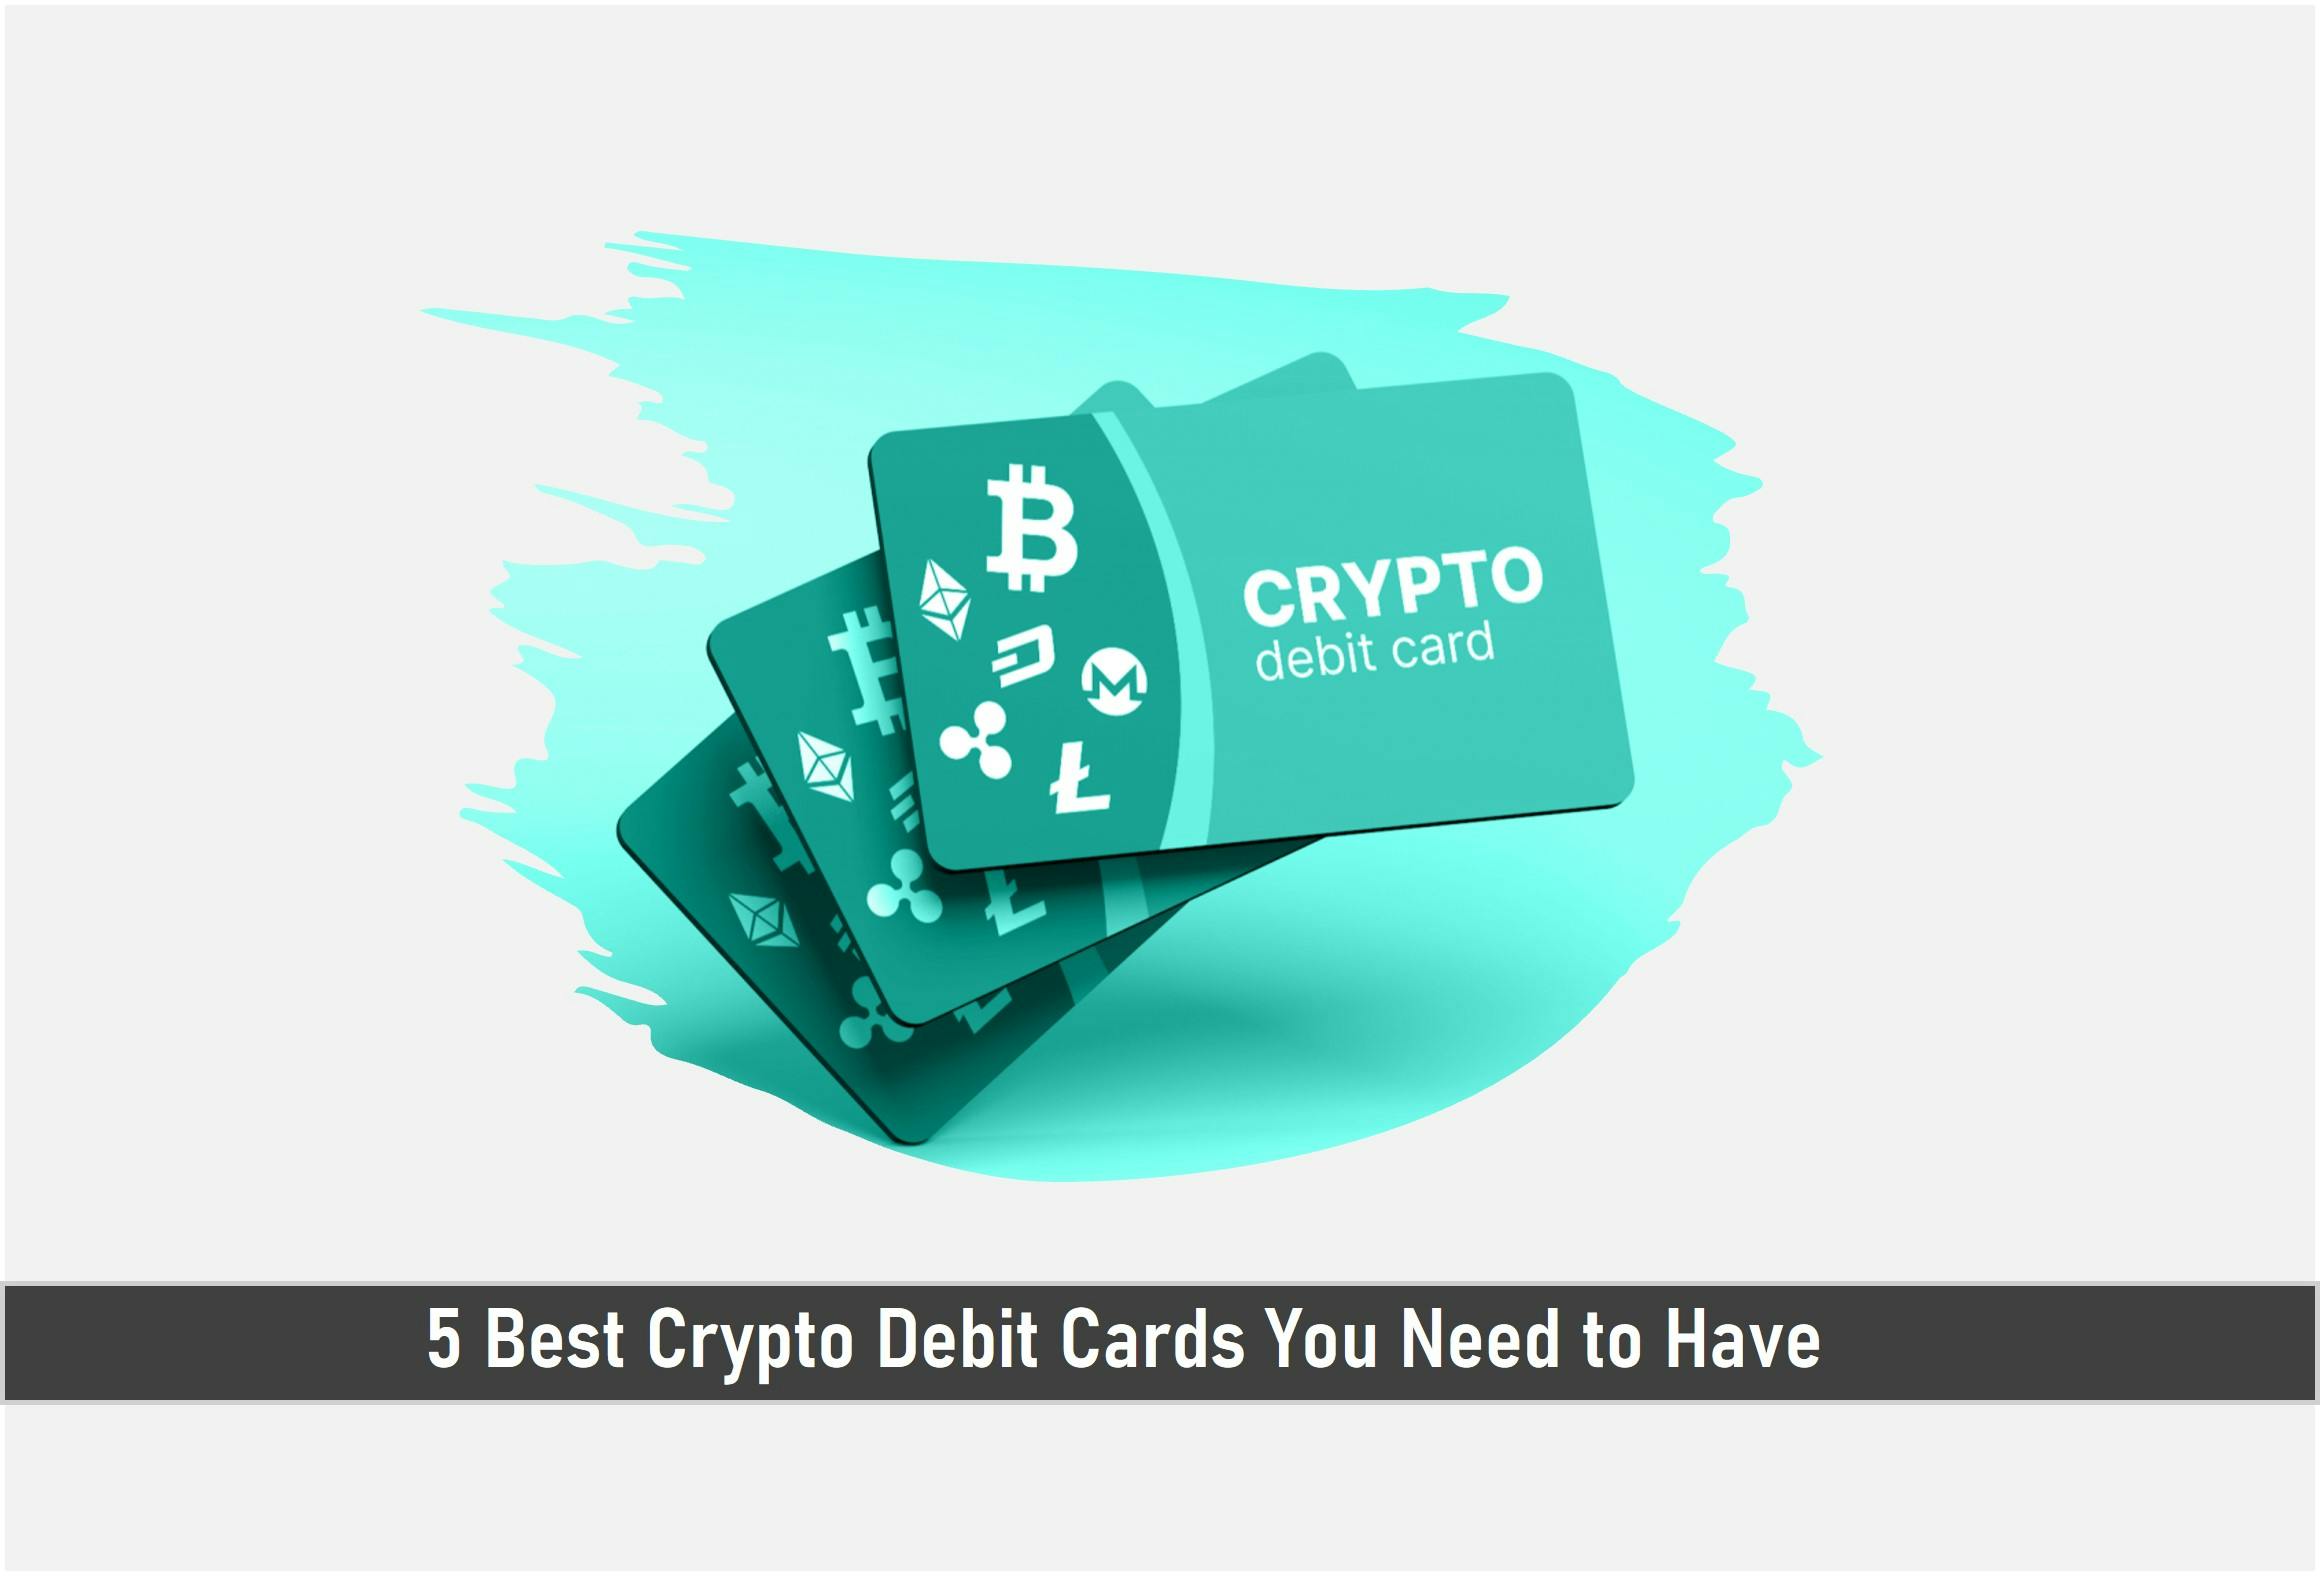 5 Best Crypto Debit Cards You Need to Have